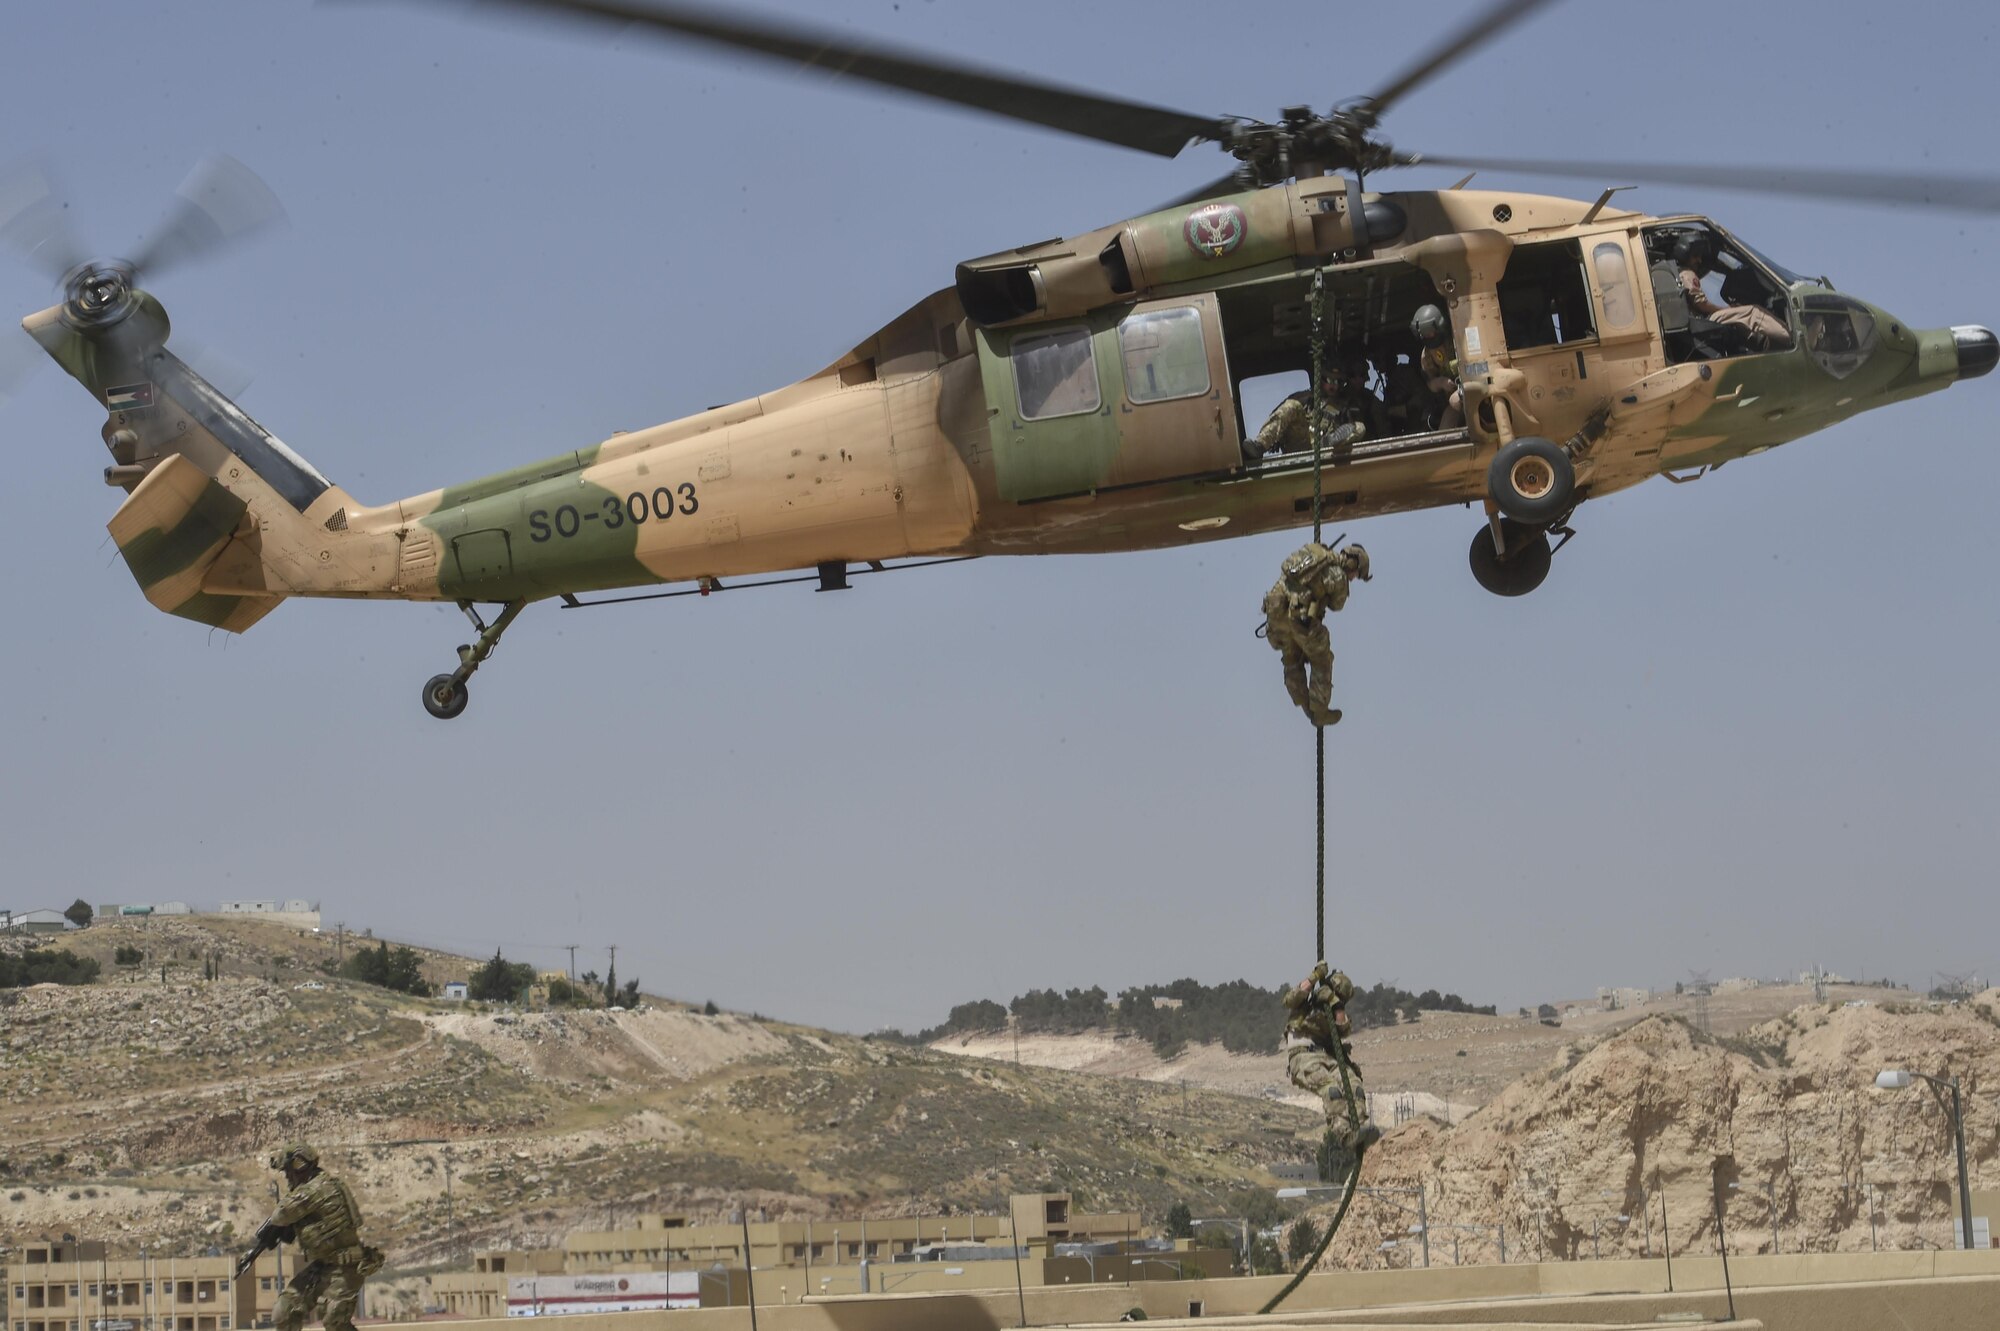 Italian special operations forces, U.S. Air Force Special Tactics and members of the Jordanian Armed Forces Special Task Force fast rope from a Royal Jordanian Air Force UH-60L Blackhawk helicopter onto a three-story building during Exercise Eager Lion May 11, 2017, at King Abdullah II Special Operations Training Center. (U.S. Air Force photo by SrA Ryan Conroy)